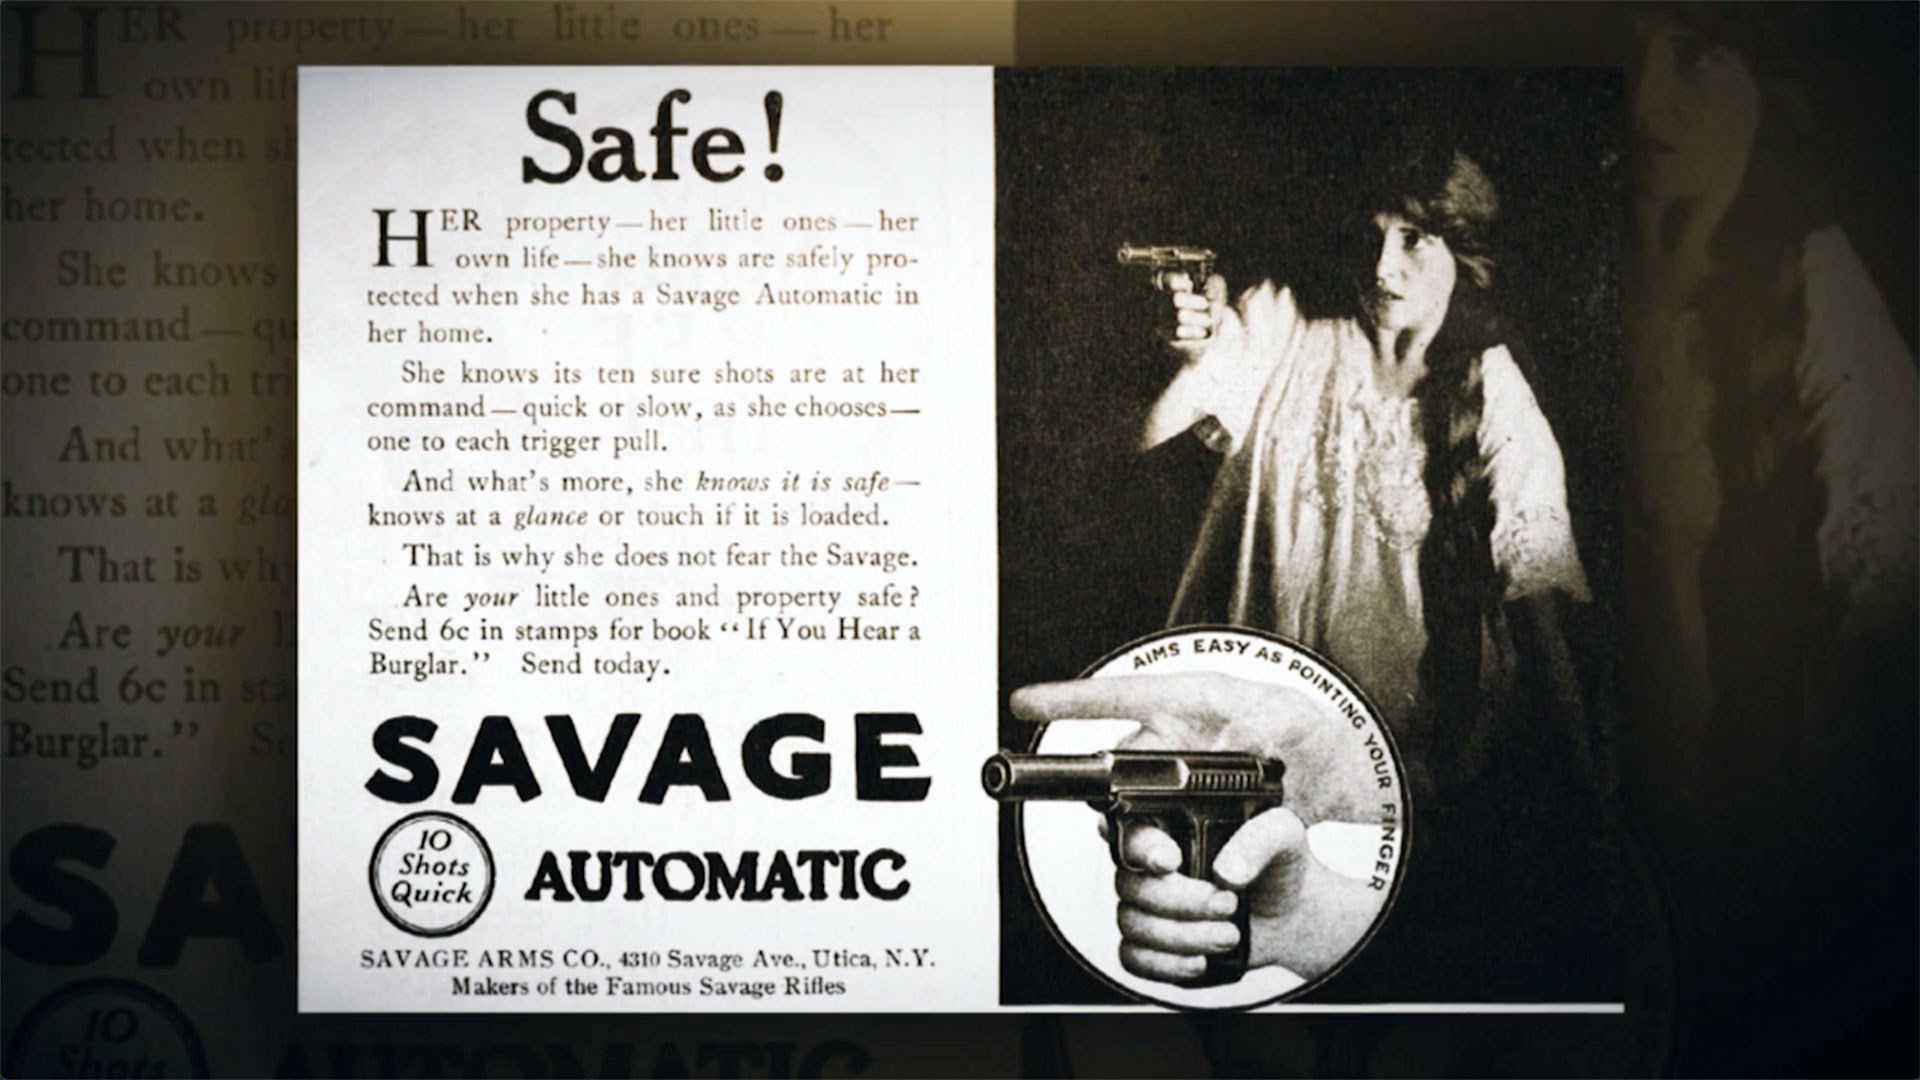 Savage Model 1907 ad showing a woman aiming a pistol at a burglar.